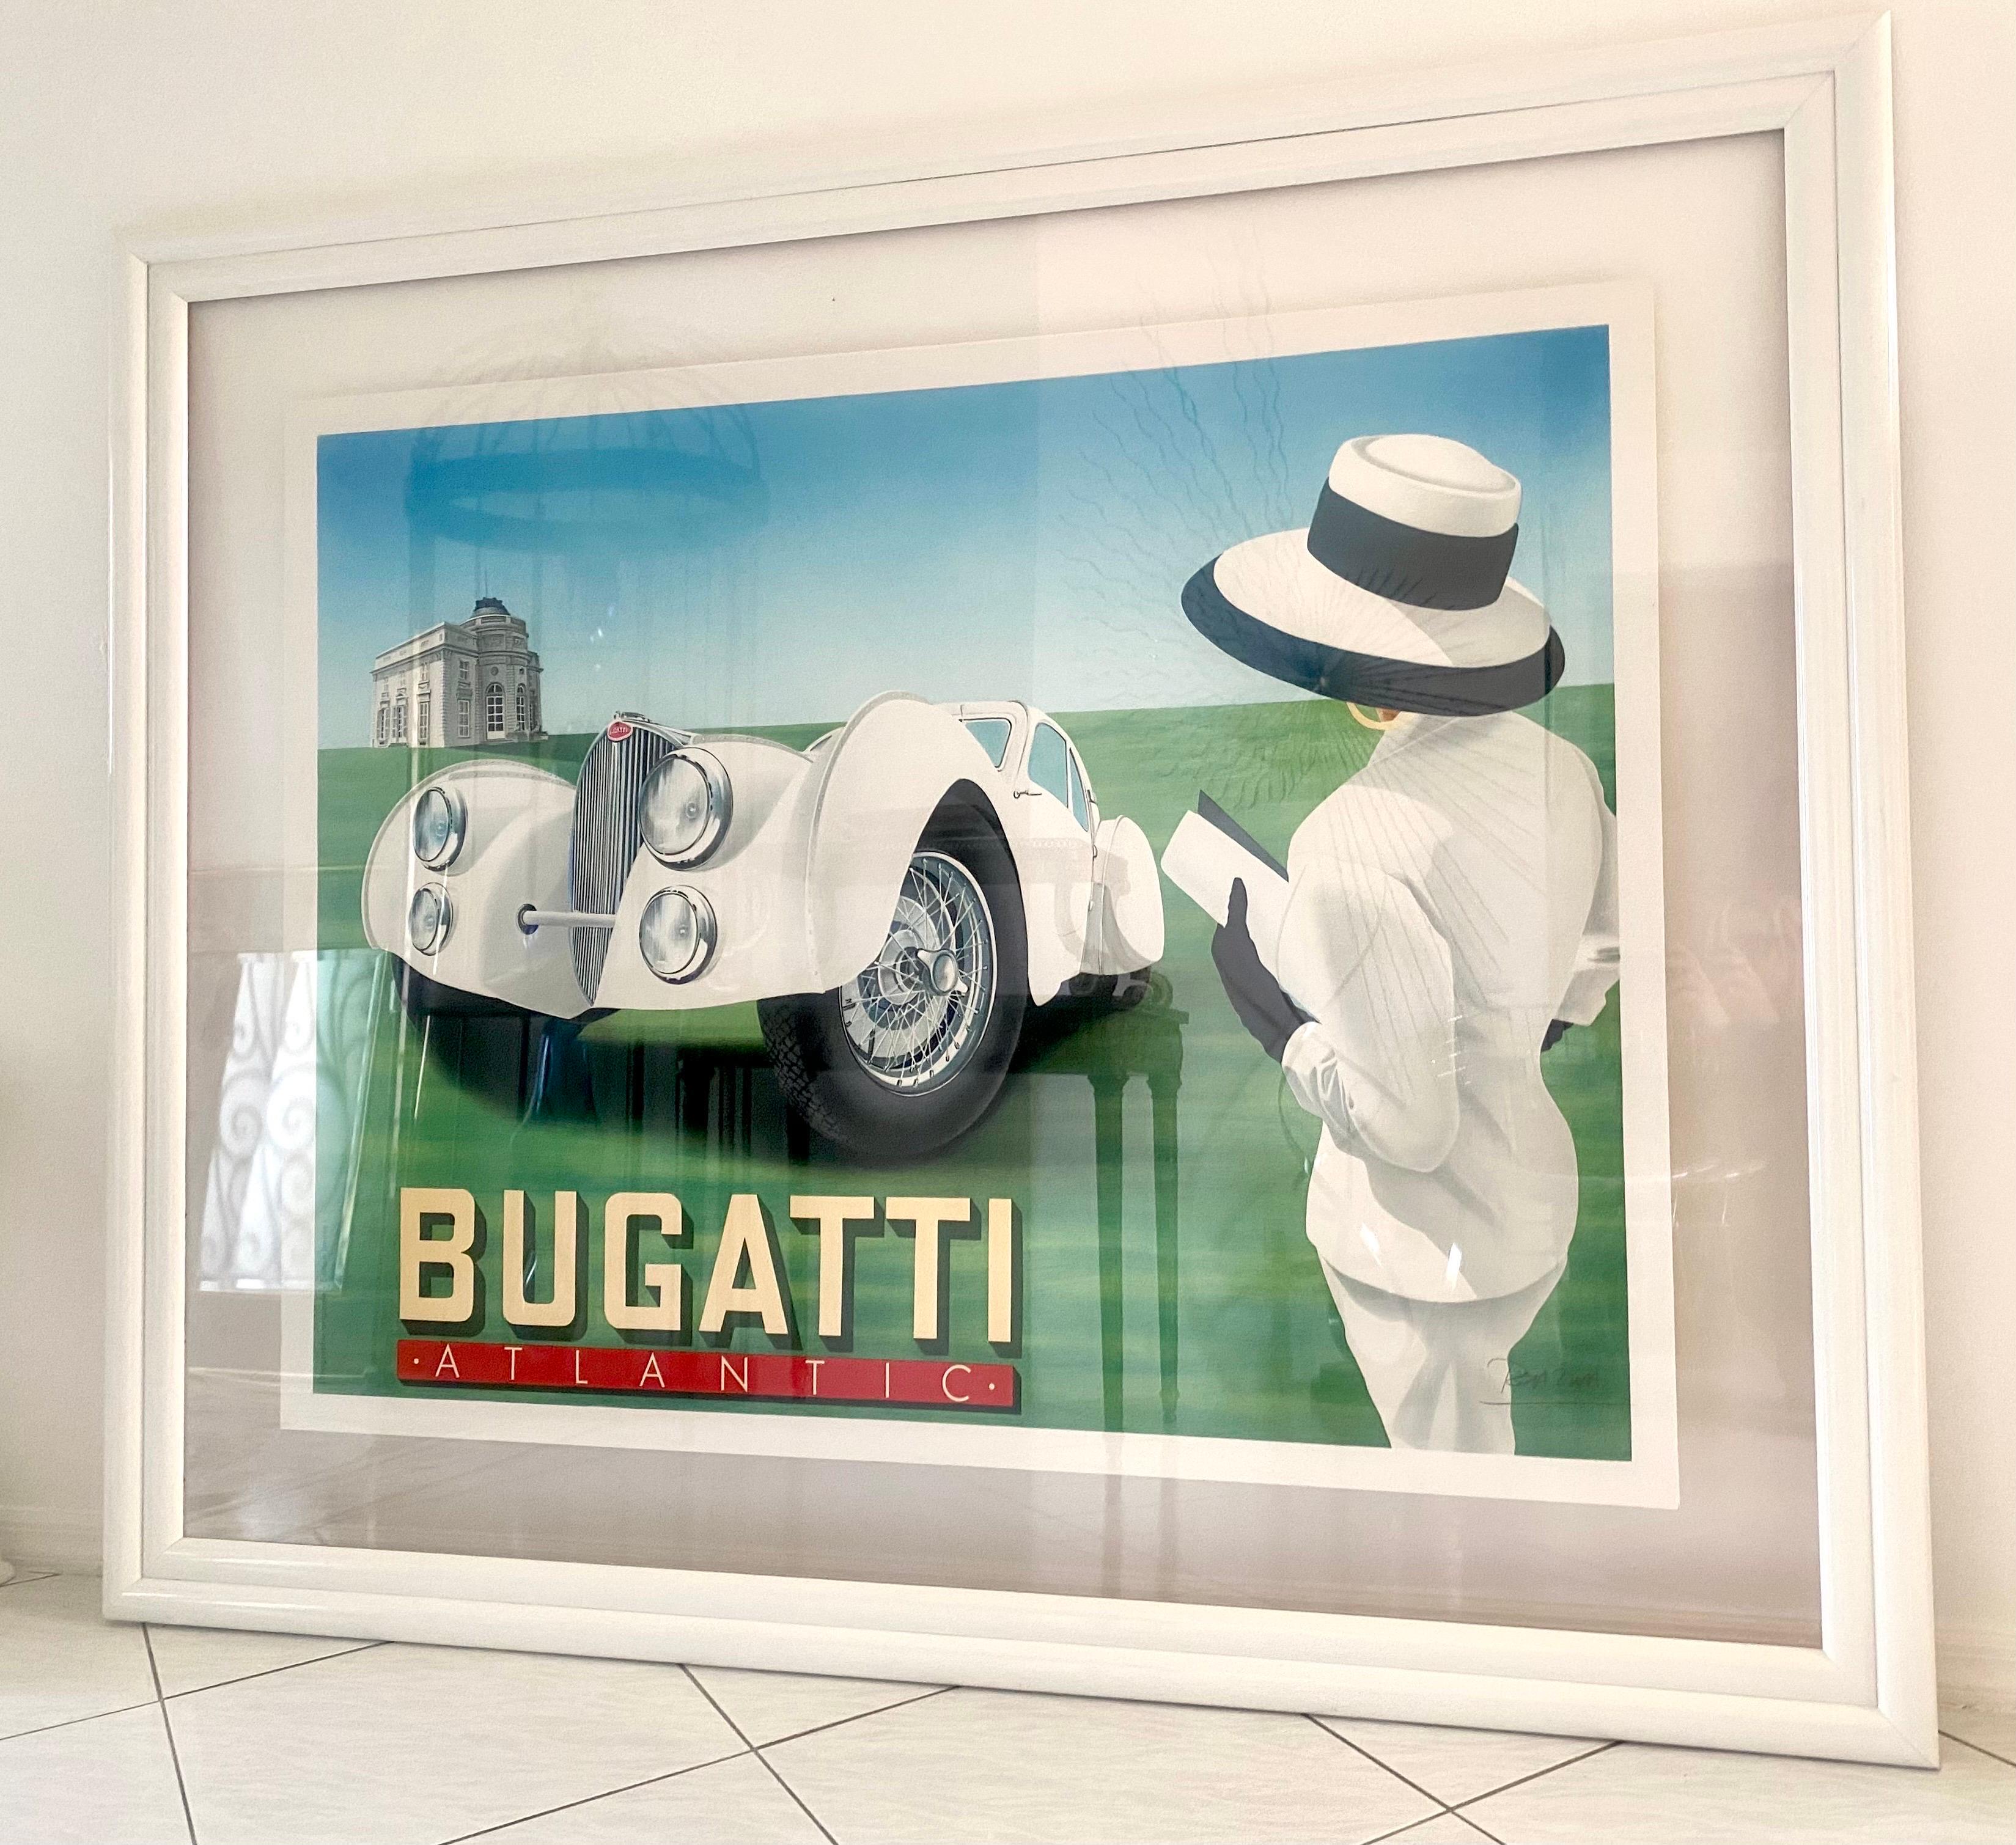 Large original limited edition lithograph poster with linen backing by Razzia, titled Bugatti Atlantic. This rare piece is custom framed in clear museum acrylic with a white lacquered wood frame. Poster size is 58 inches wide by 44.5 inches high.